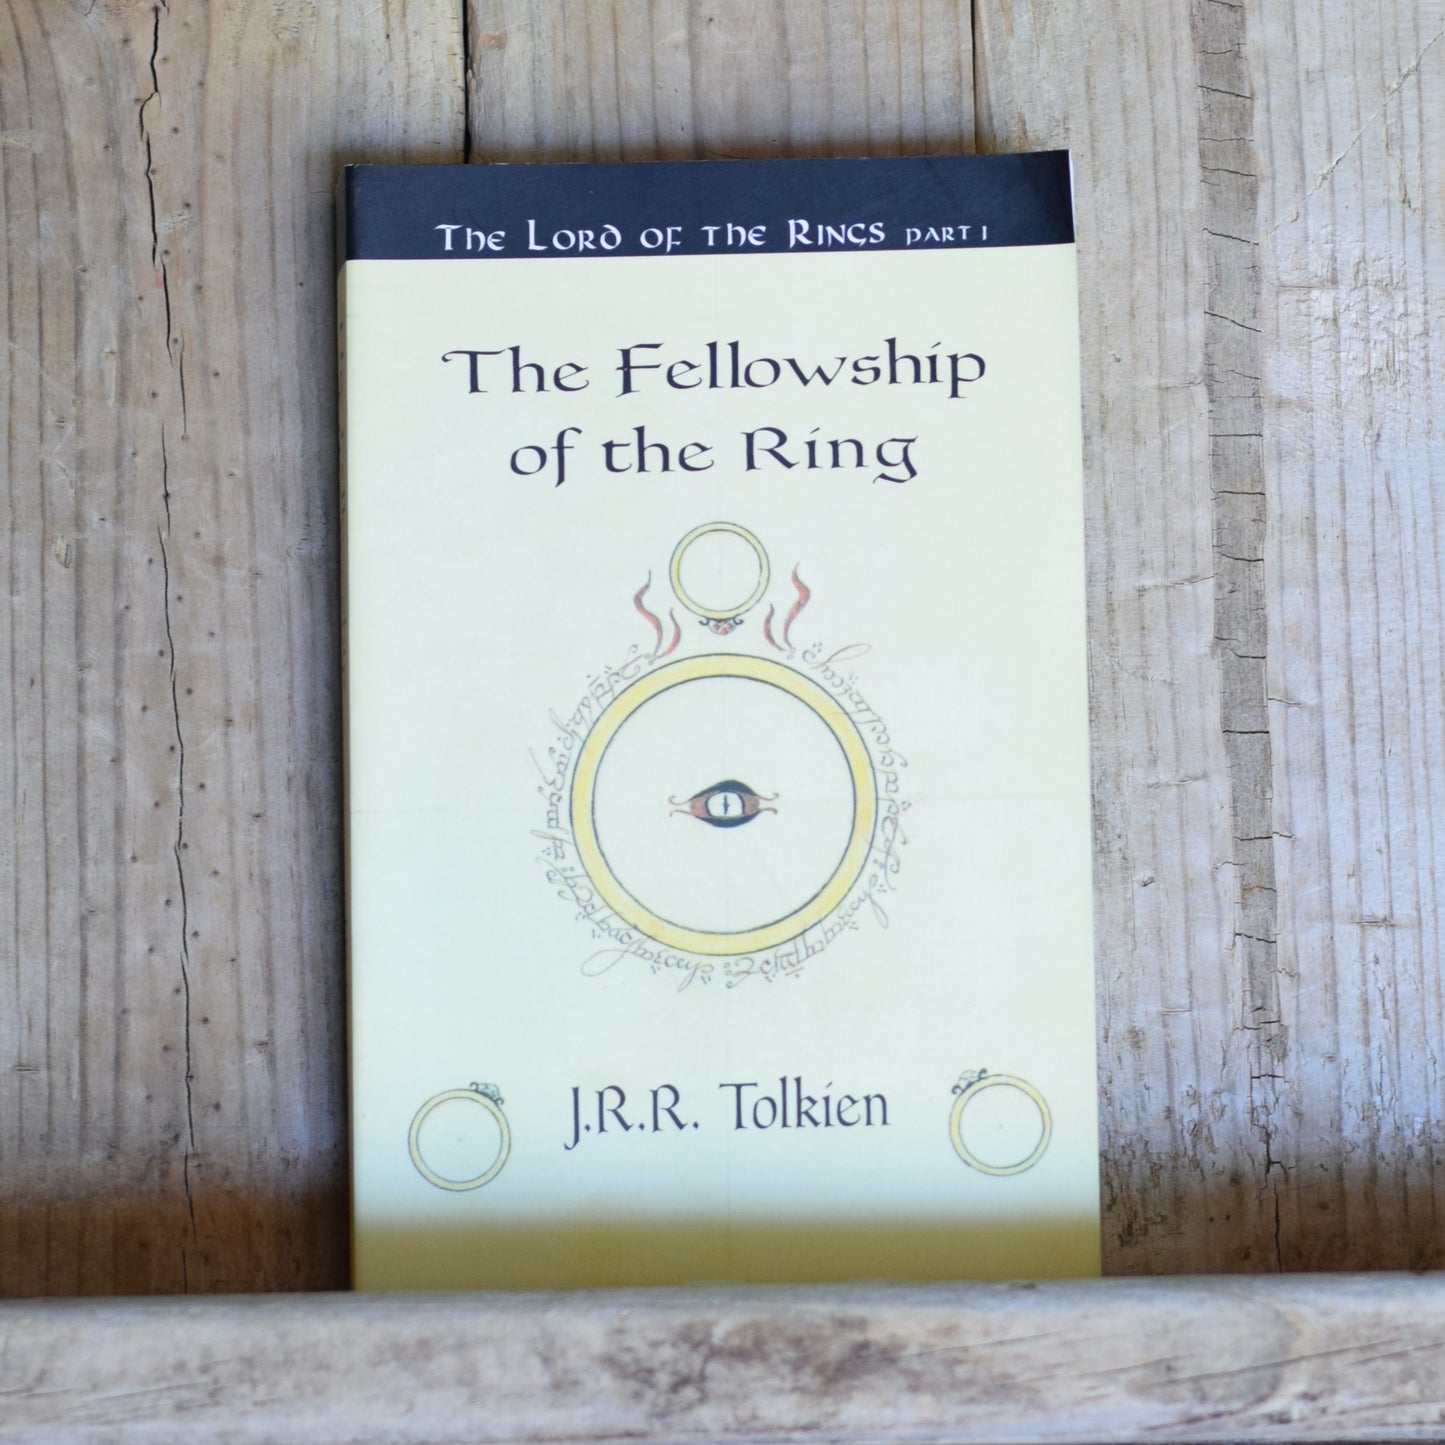 Fantasy Paperback: J R R Tolkien - The Fellowship of the Ring